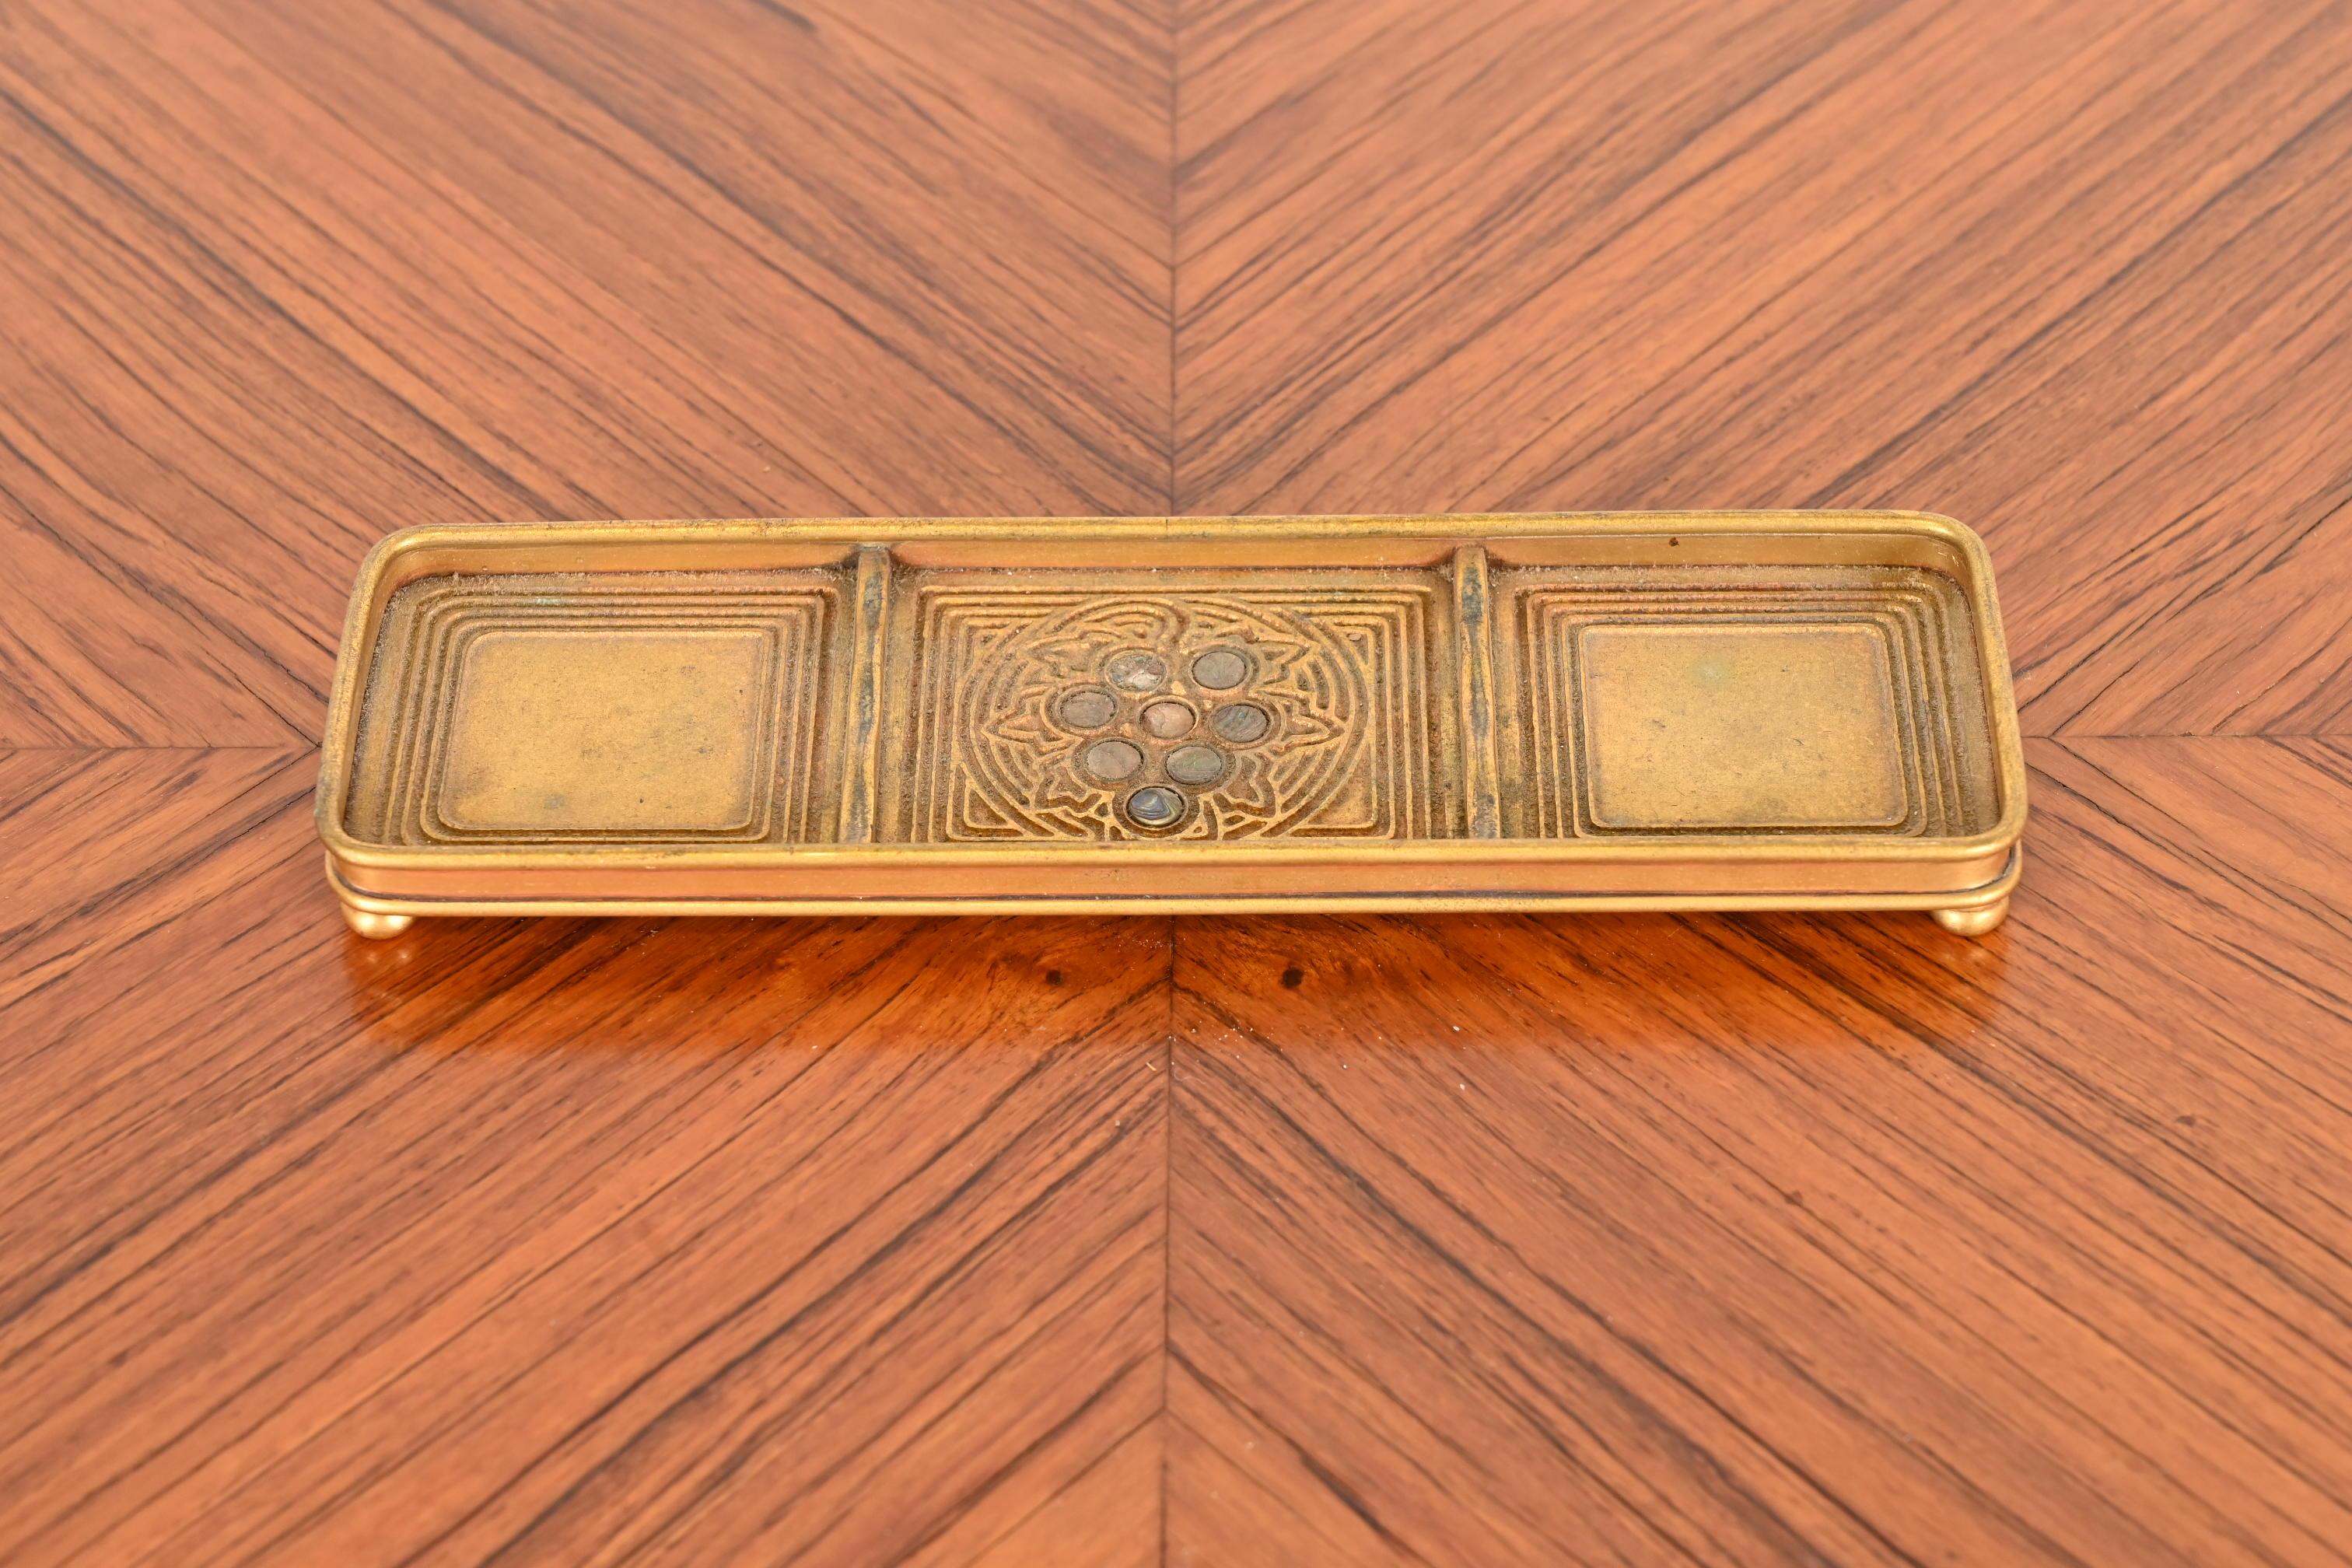 A gorgeous Art Deco period bronze doré and inlaid abalone pen tray

By Tiffany Studios

New York, USA, early 20th century

Measures: 8.75